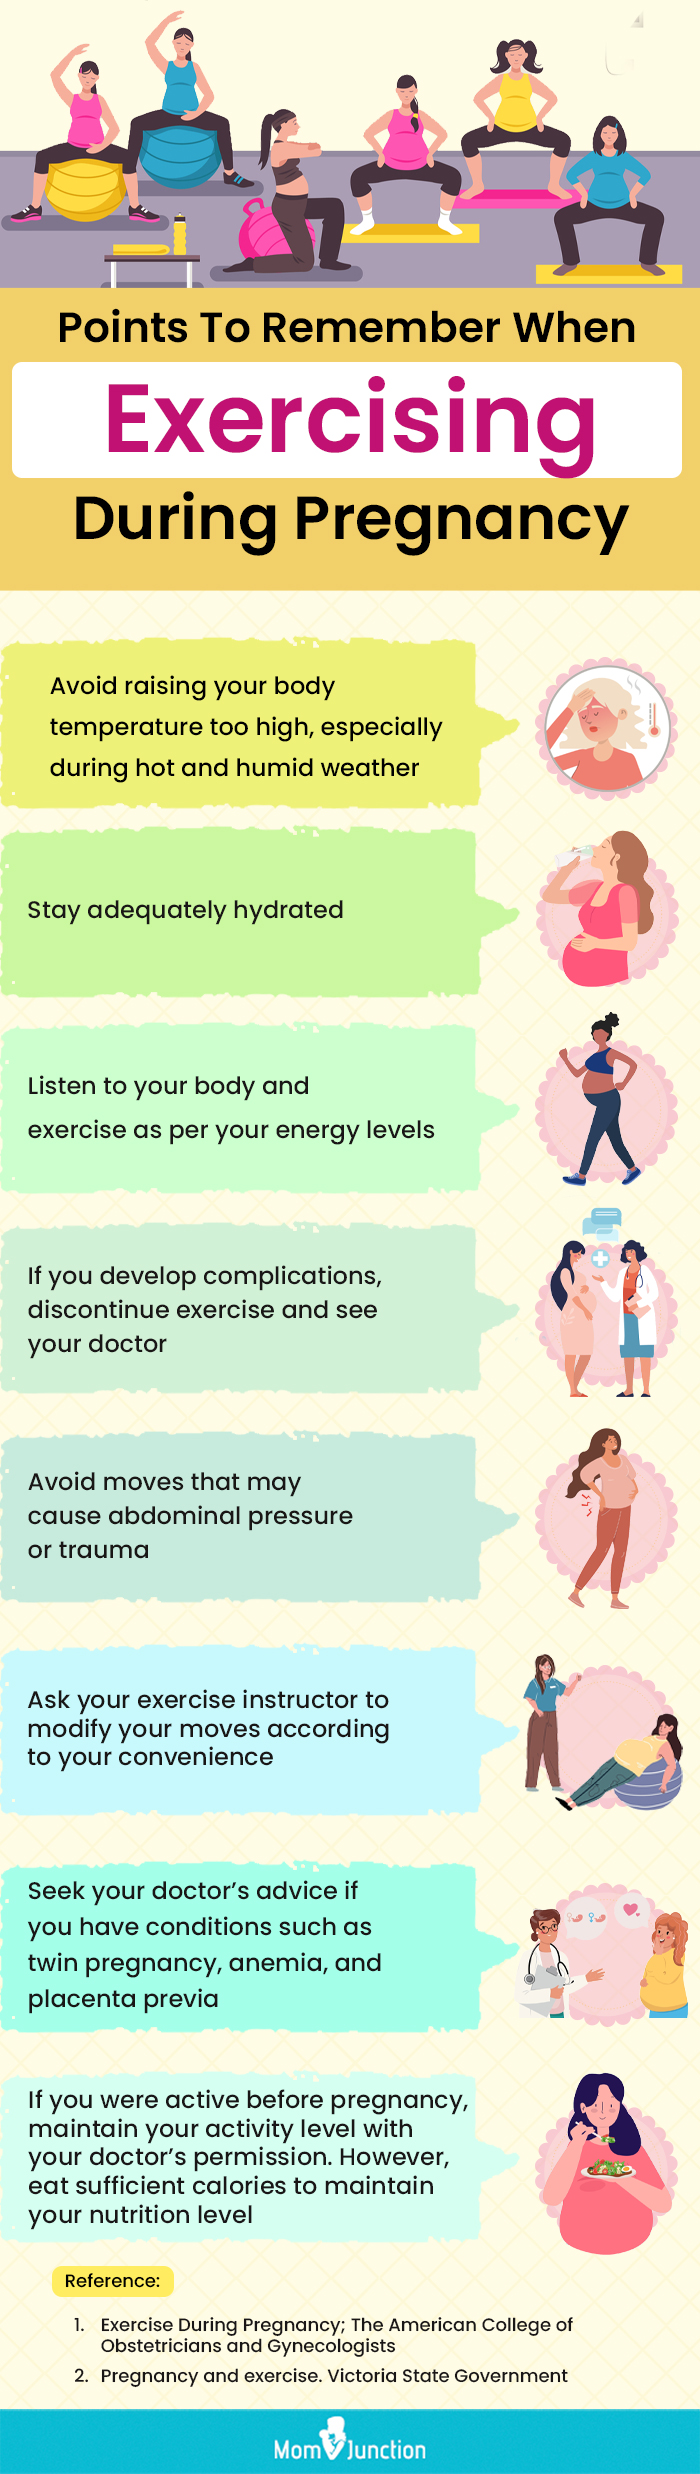 points to remember when exercising during pregnancy (infographic)